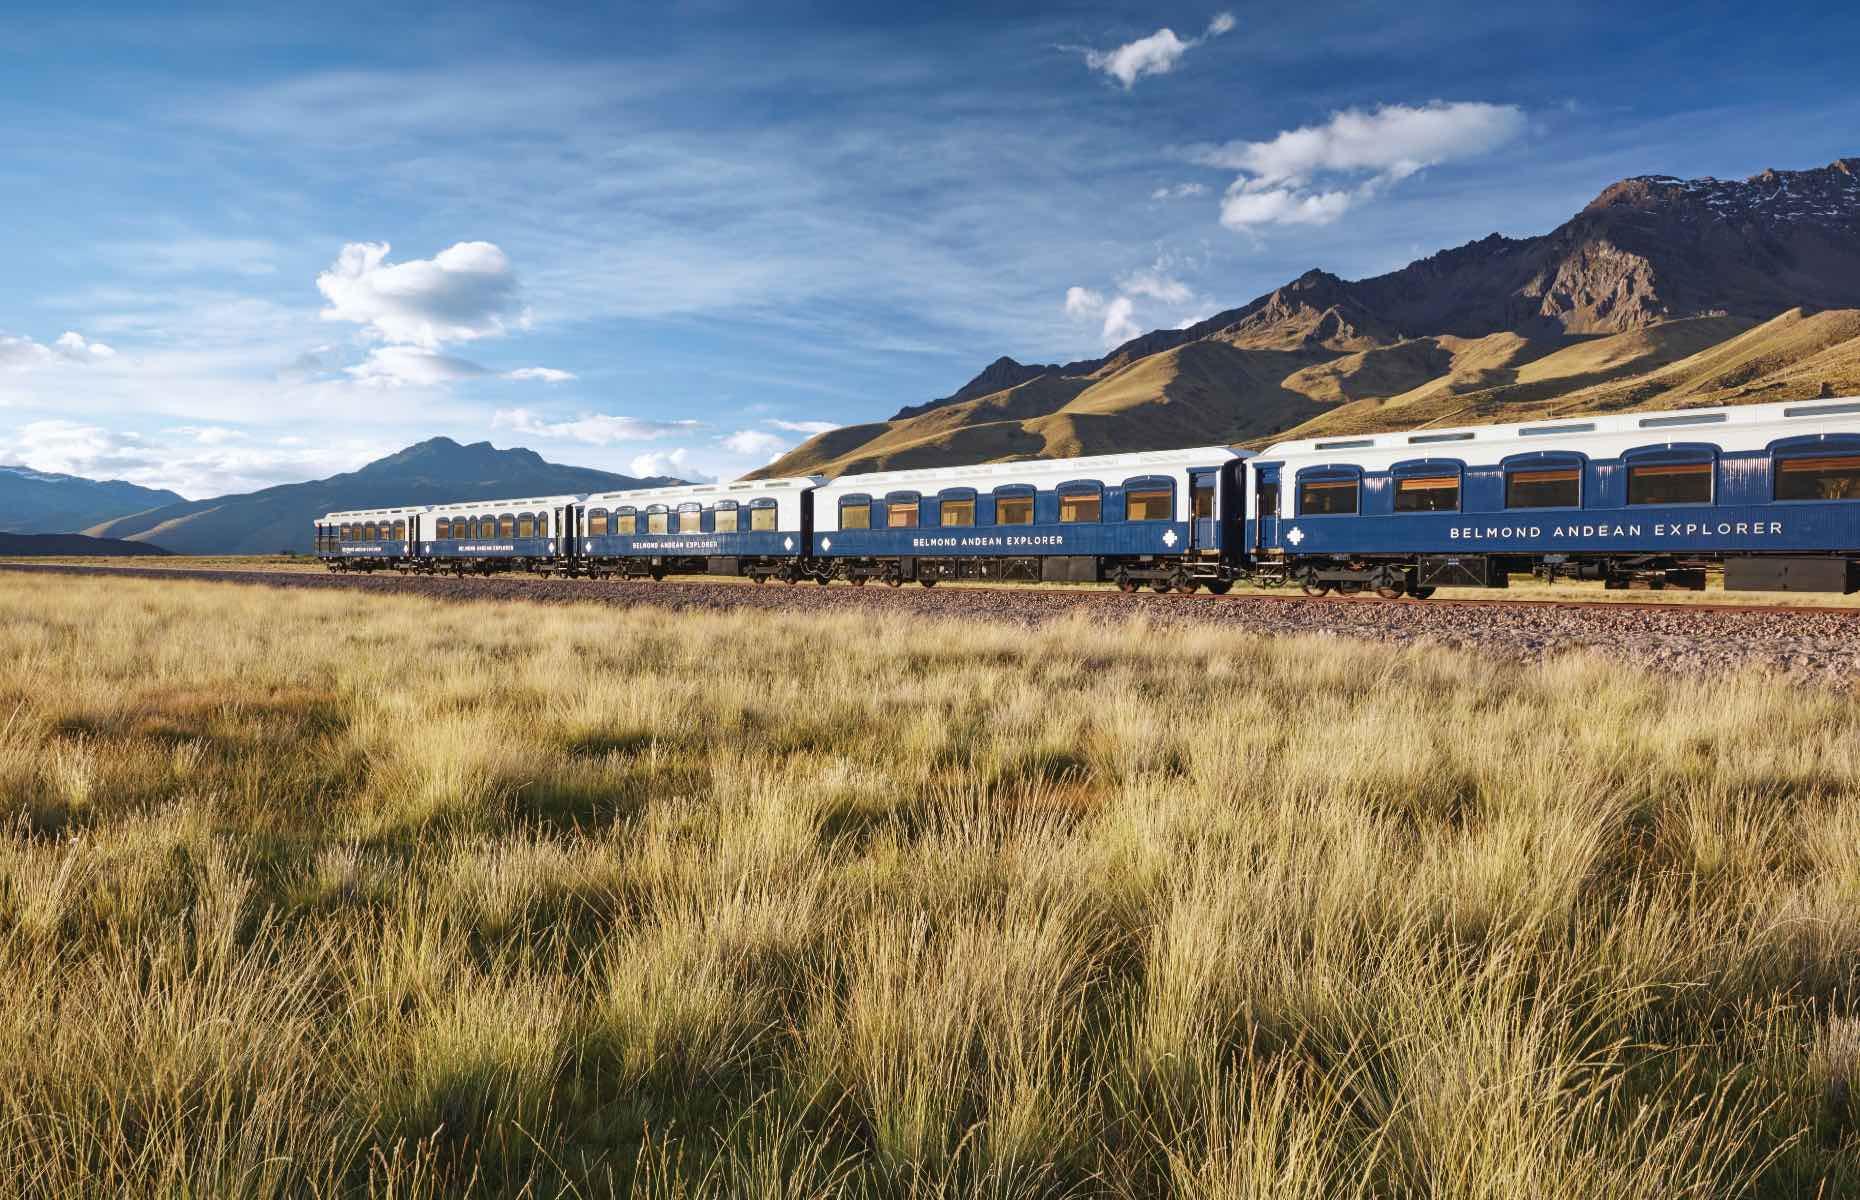 <p>Offering what’s arguably, one of the most picturesque overnight train journeys you’ll ever take, the midnight blue <a href="https://www.belmond.com/trains/south-america/peru/belmond-andean-explorer/">Andean Explorer</a> takes you through the enigmatic Andean mountains, treating you to the top natural and manmade sights of Peru. The one- or two-night journey begins in the former ancient Incan capital of Cusco and ends in the UNESCO World Heritage Site of Arequipa, taking in epic sights such as Lake Titicaca and Colca Canyon on the way.</p>